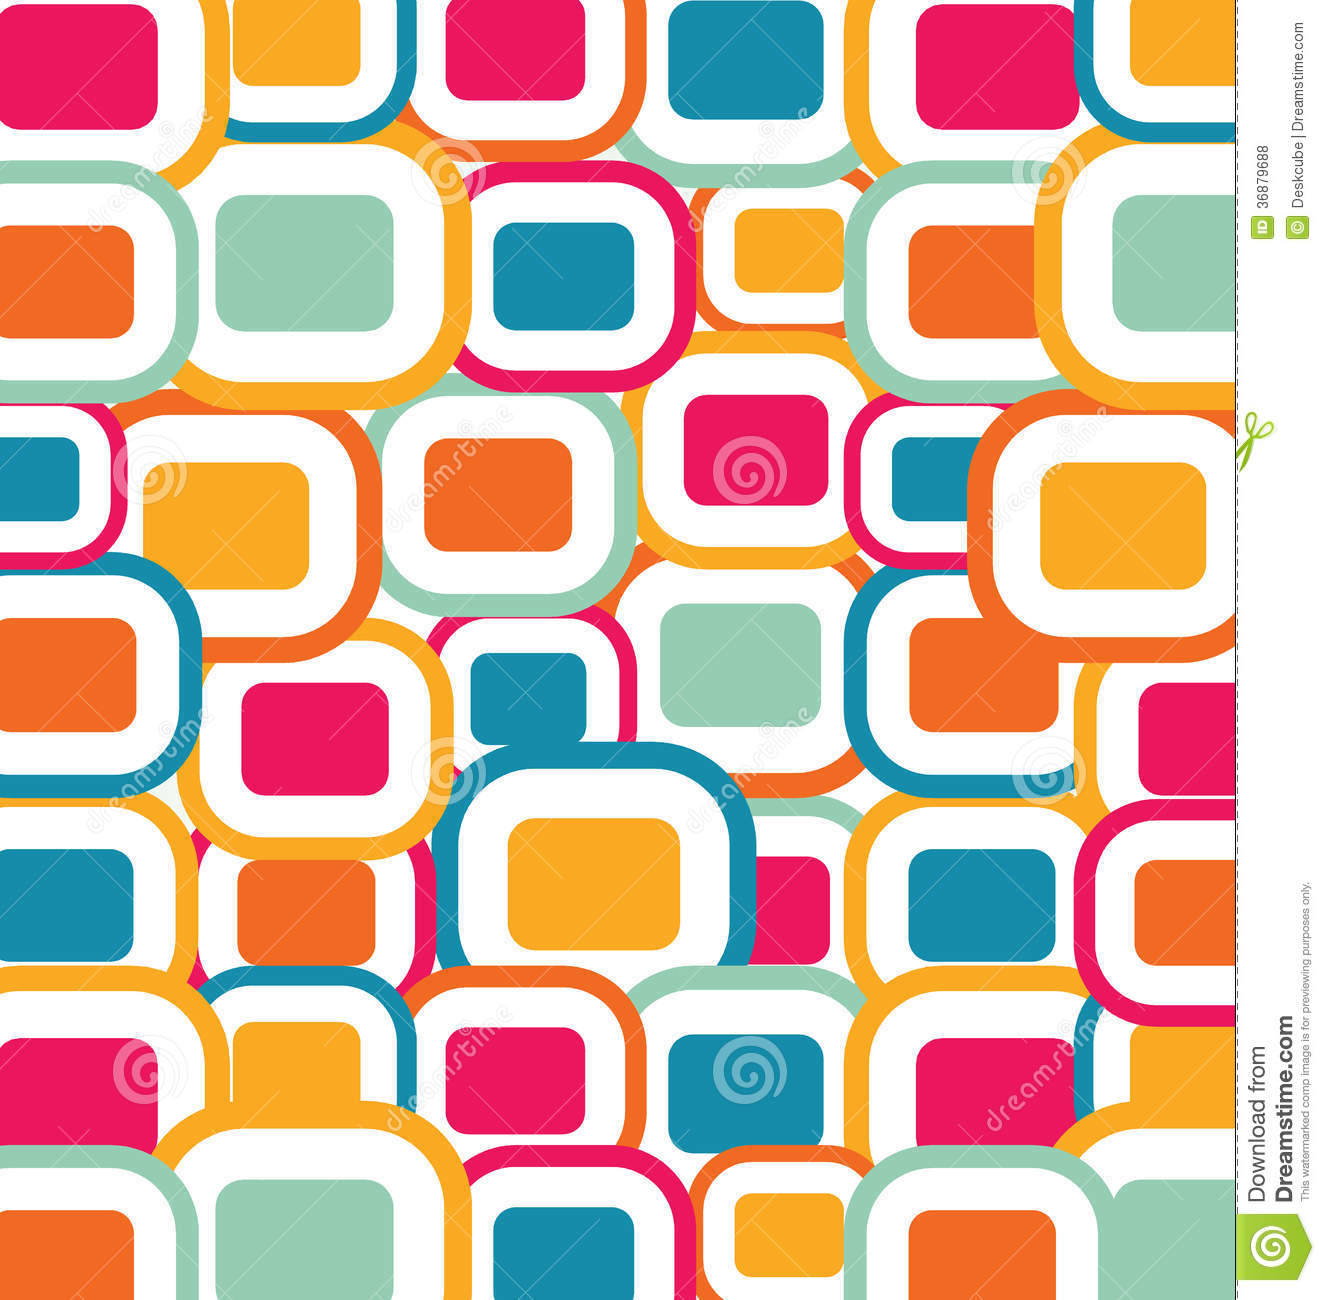 Vintage 70s Colorful Televisions Wallpaper